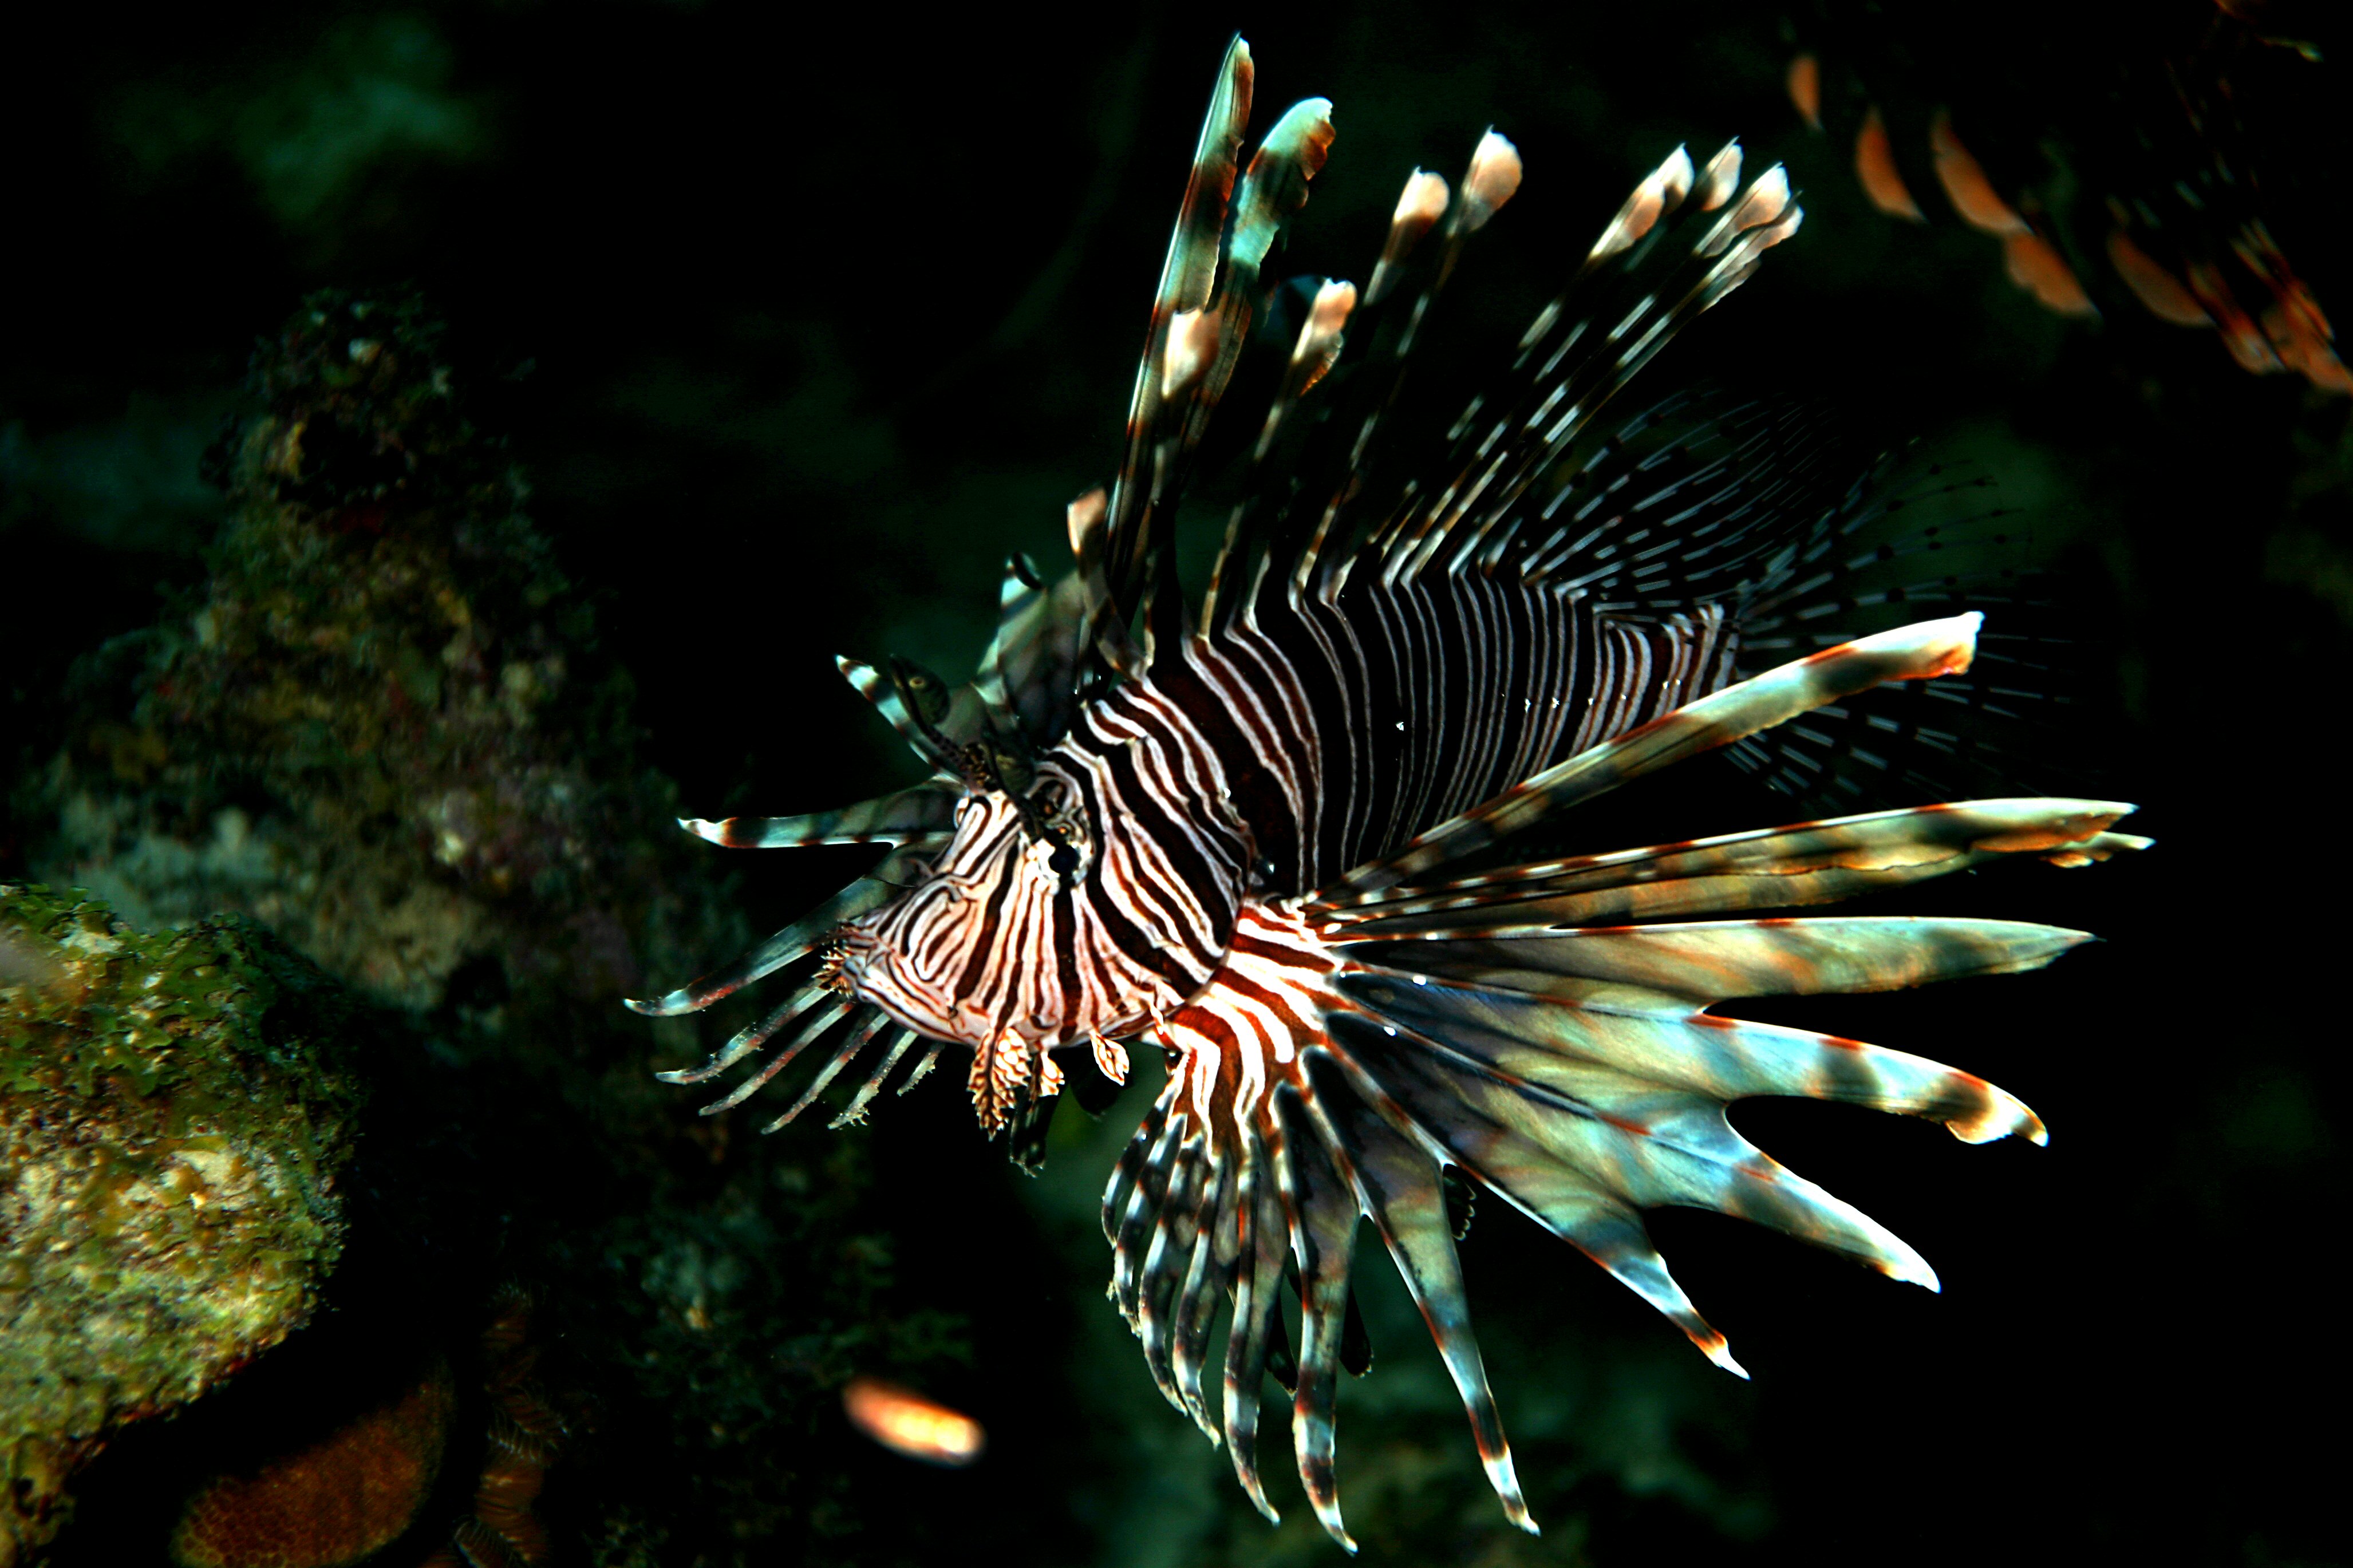 Image: Updating fluid-powered machines: Scientists design bizarre-looking lionfish powered by a blood-like compound